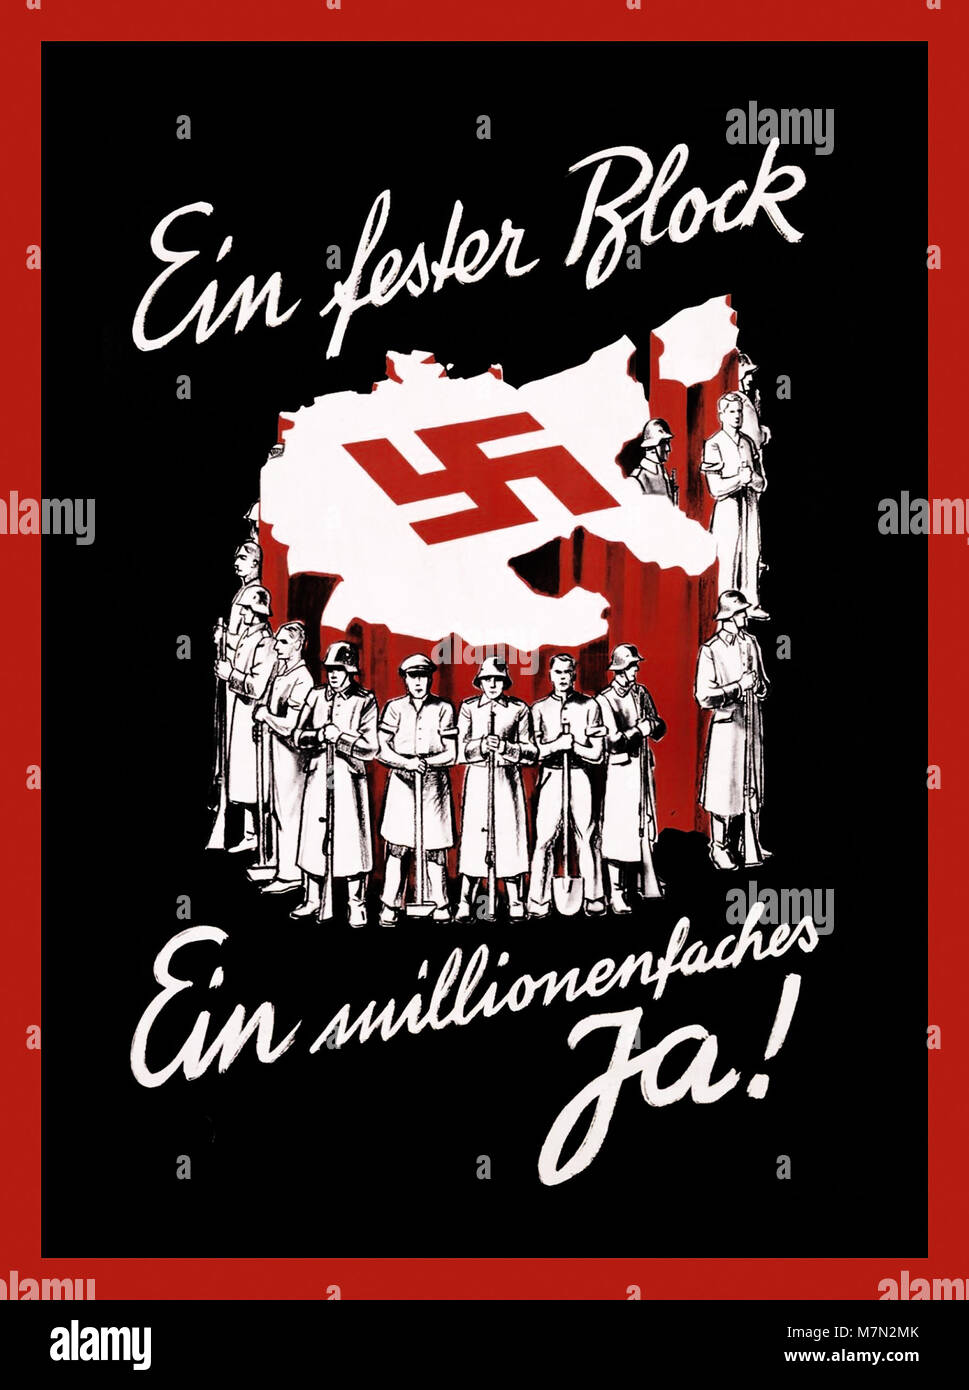 Vintage WW2 Nazi Propaganda poster with Swastika Map of Germany promotes the 'Anschluss' of Austria, 1938  'A solid block / a millionfold yes!' This propaganda poster promotes meeting on 10 April 1938 for Austria's 'Anschluss'. The Nazi leadership de-seminated the fiction of  defending 'national community', whose power was based on military, industry and agriculture and was ready to 'defend the achievements of National Socialism' at any cost... Stock Photo